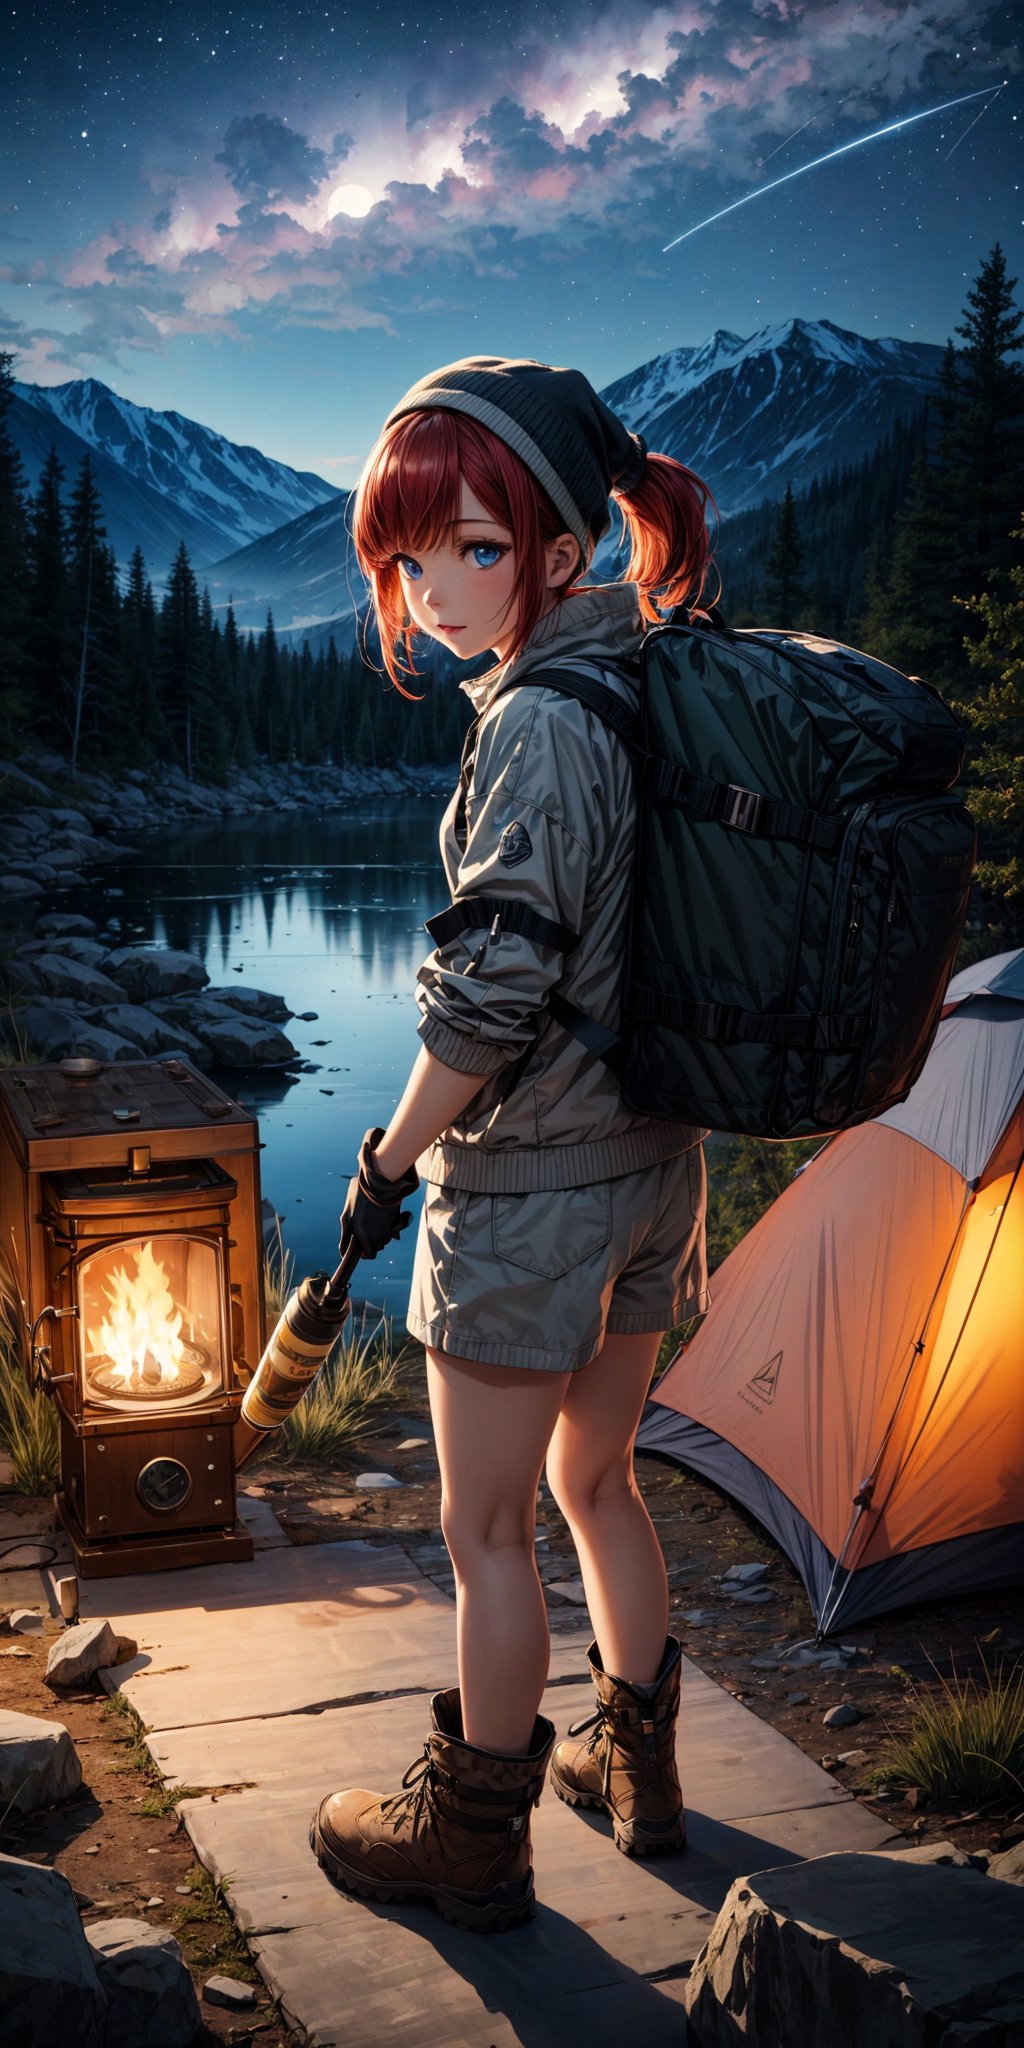 masterpiece, best quality, ultra-detailed, illustration, 1girl, red hair, solo, outdoors, camping, night, mountains, nature, stars, moon, tent, twin ponytails, blue eyes, cheerful, happy, backpack, sleeping bag, camping stove, water bottle, mountain boots, gloves, sweater, hat, flashlight, forest, rocks, river, wood, smoke, shadows, contrast, clear sky, constellations, Milky Way, peaceful, serene, quiet, tranquil, remote, secluded, adventurous, exploration, escape, independence, survival, resourcefulness, challenge, perseverance, stamina, endurance, observation, intuition, adaptability, creativity, imagination, artistry, inspiration, beauty, awe, wonder, gratitude, appreciation, relaxation, enjoyment, rejuvenation, mindfulness, awareness, connection, harmony, balance, texture, detail, realism, depth, perspective, composition, color, light, shadow, reflection, refraction, tone, contrast, foreground, middle ground, background, naturalistic, figurative, representational, impressionistic, expressionistic, abstract, innovative, experimental, unique